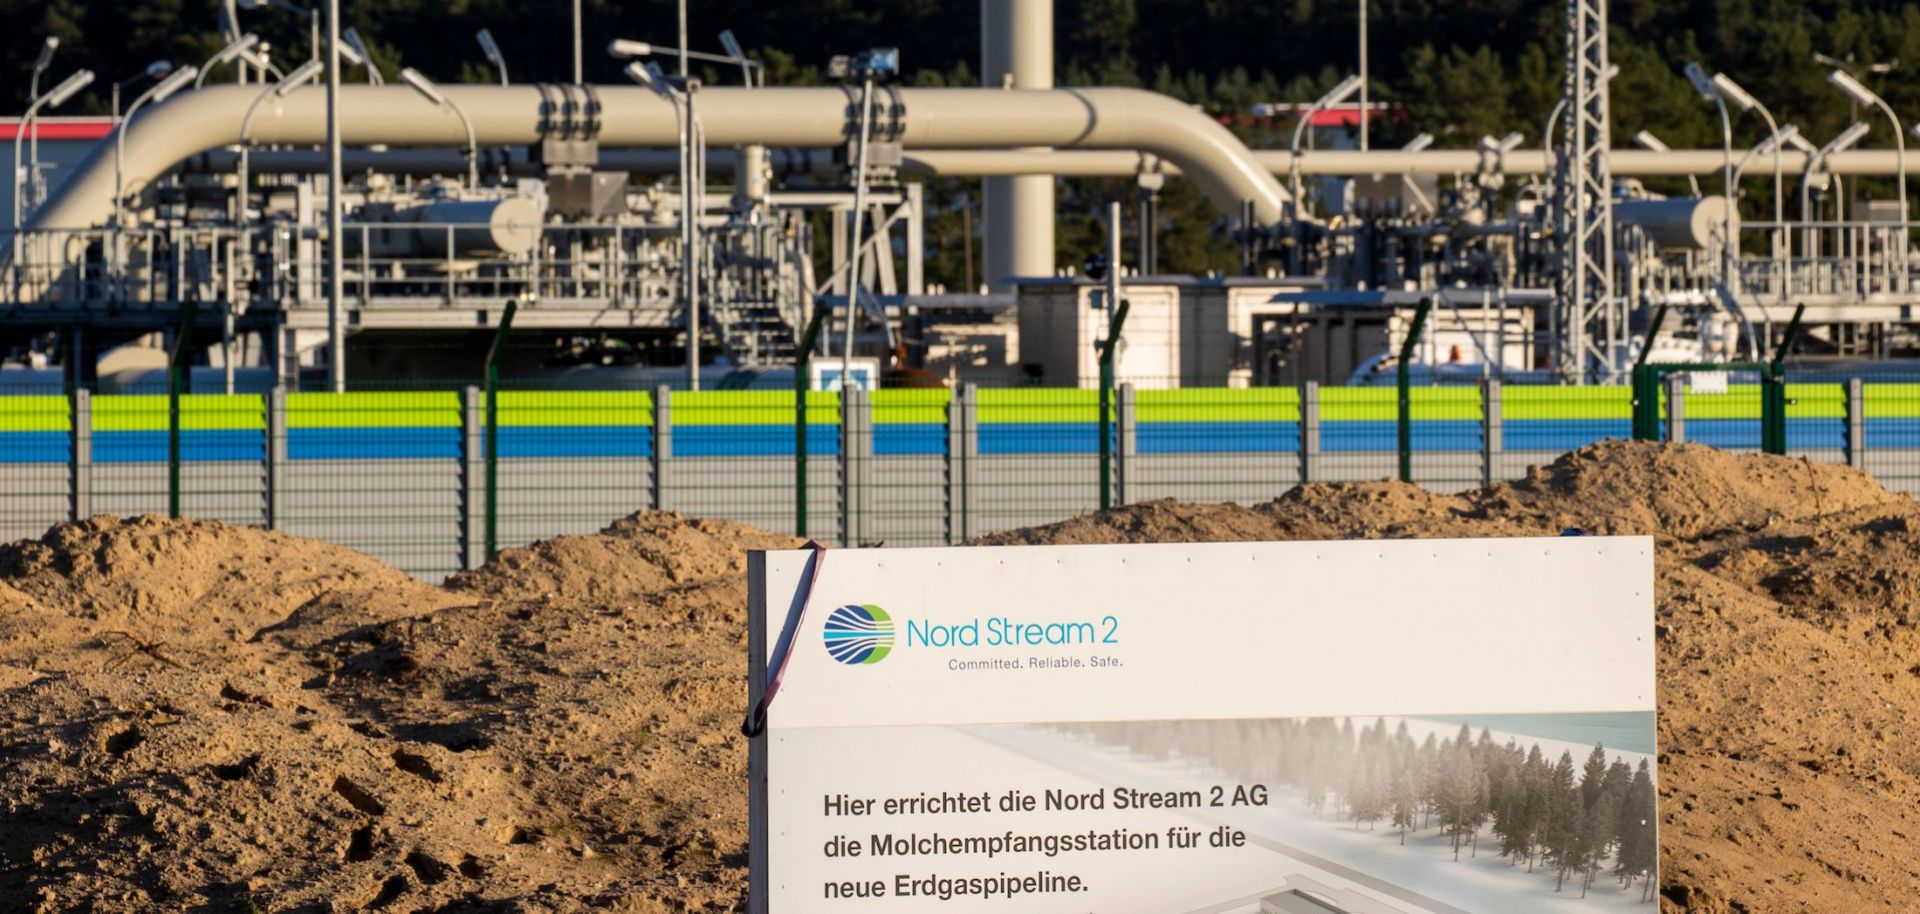 The landfall facility for the Nord Stream 2 pipeline is seen in Lubmin, Germany, on Sept. 7, 2020. 